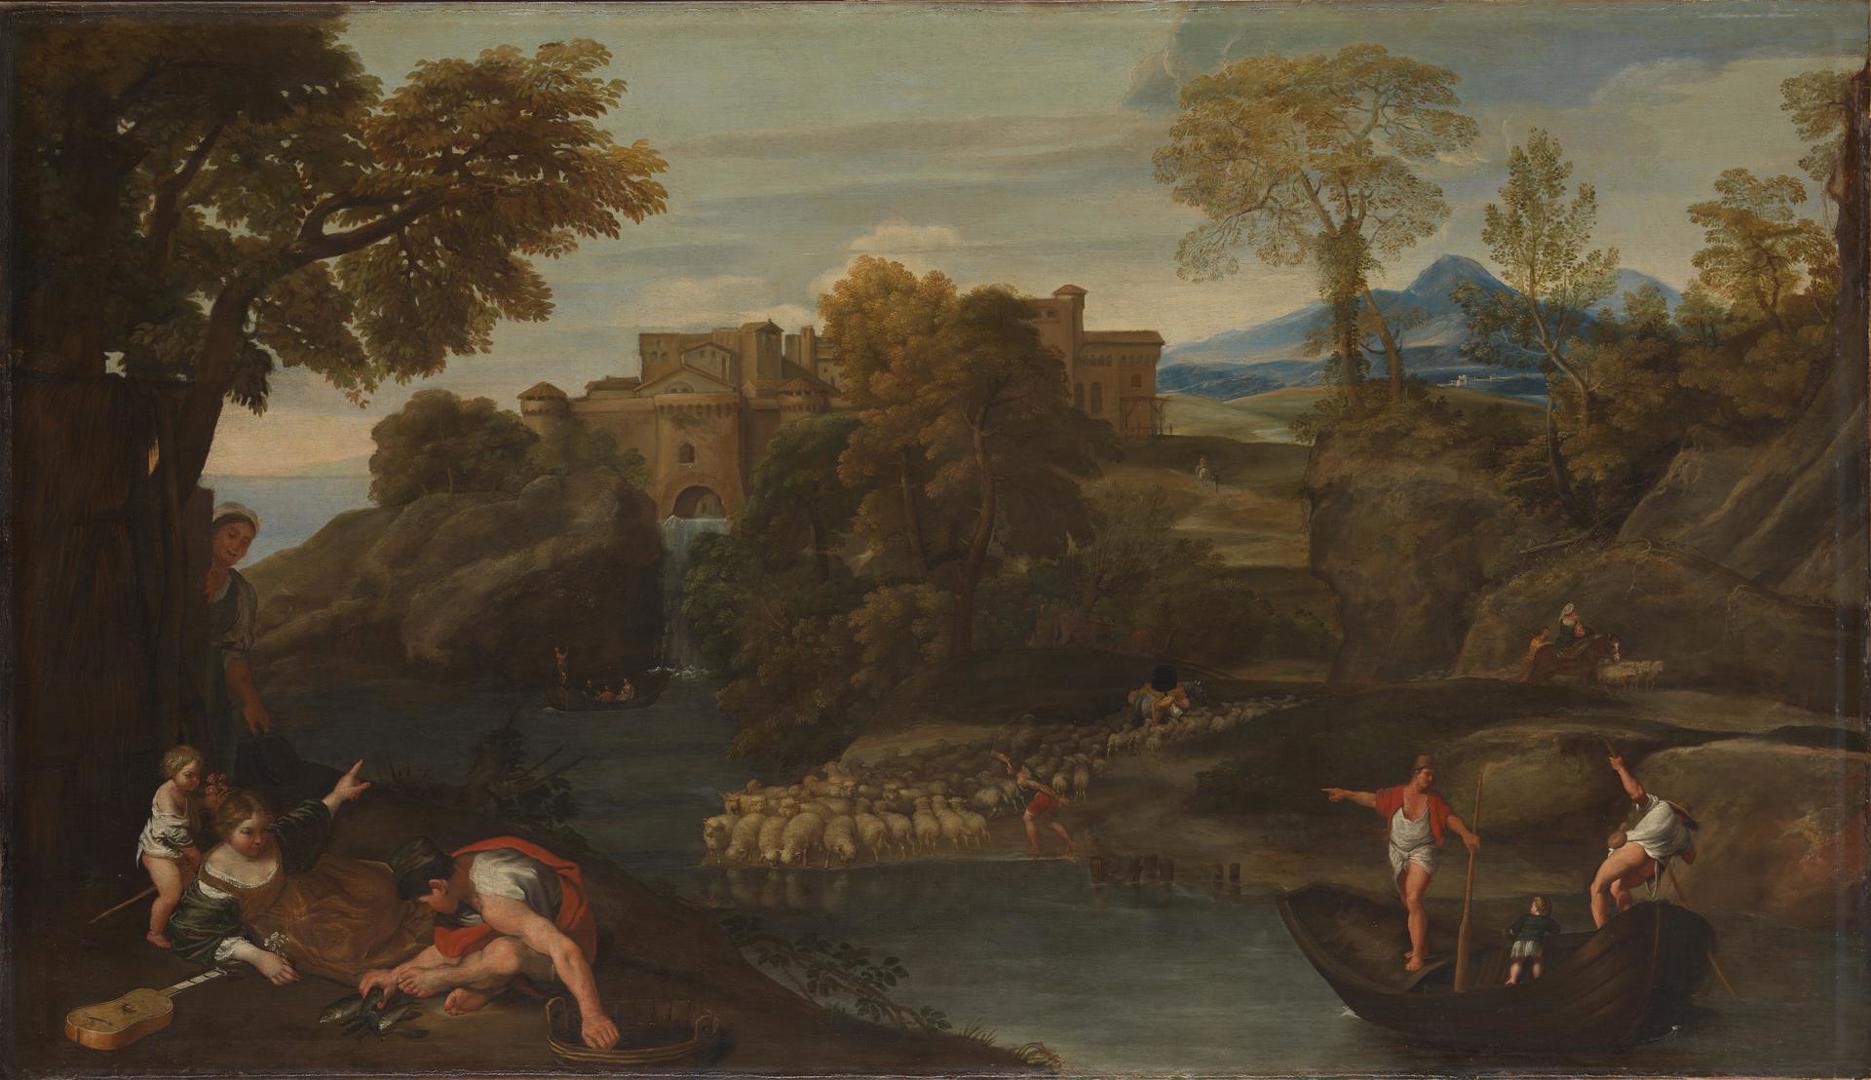 Landscape with a Fortified Town by Domenichino